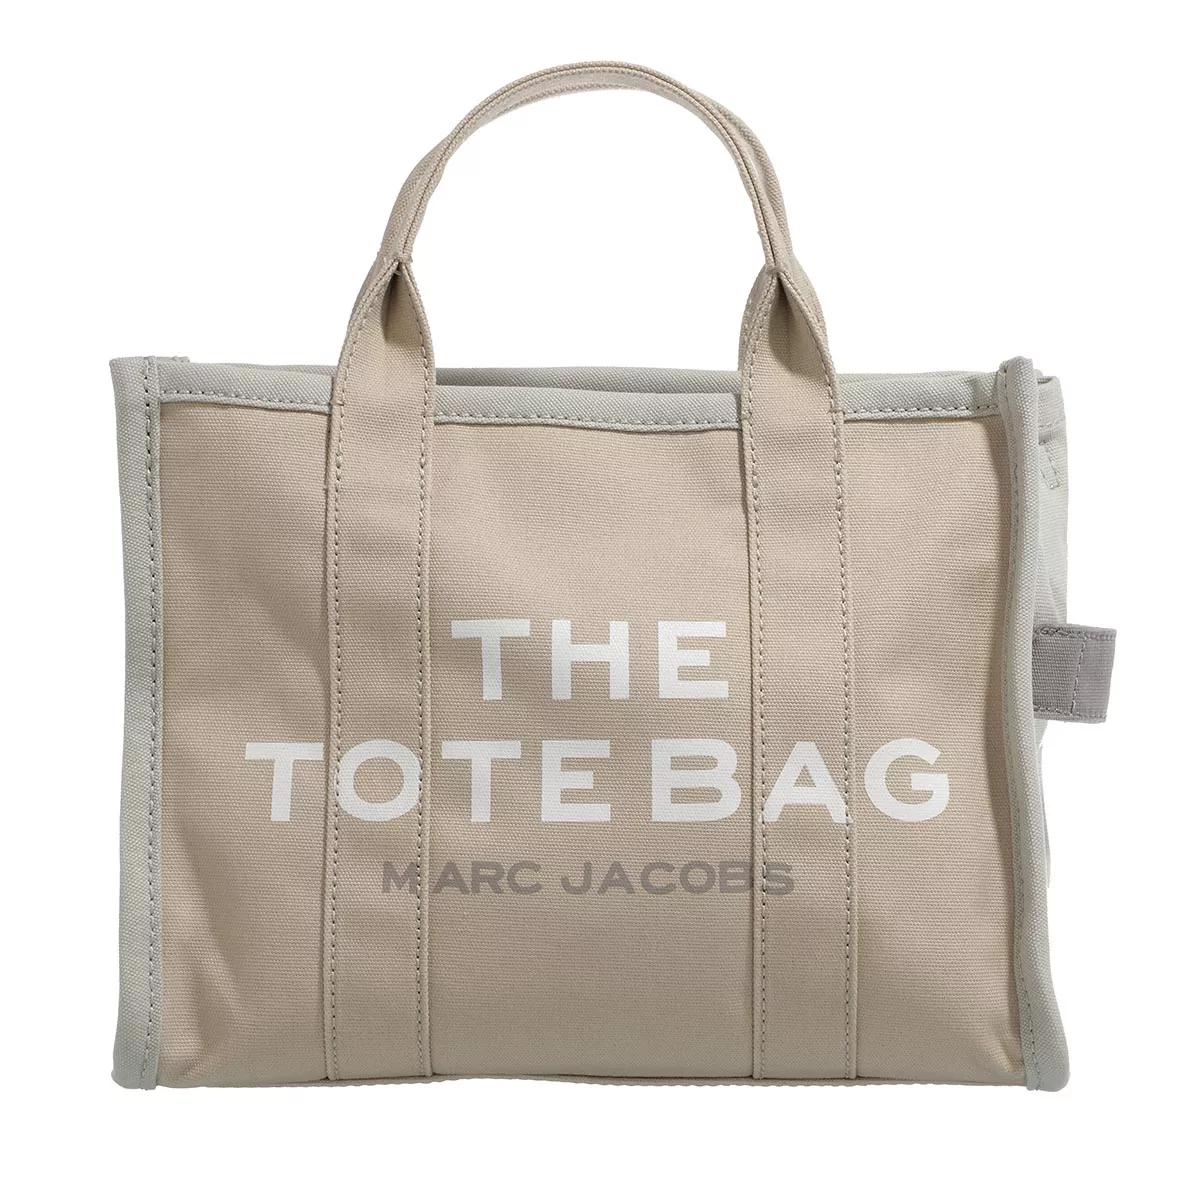 Marc Jacobs The Small Colorblock Tote Bag Beige Multi, Tote